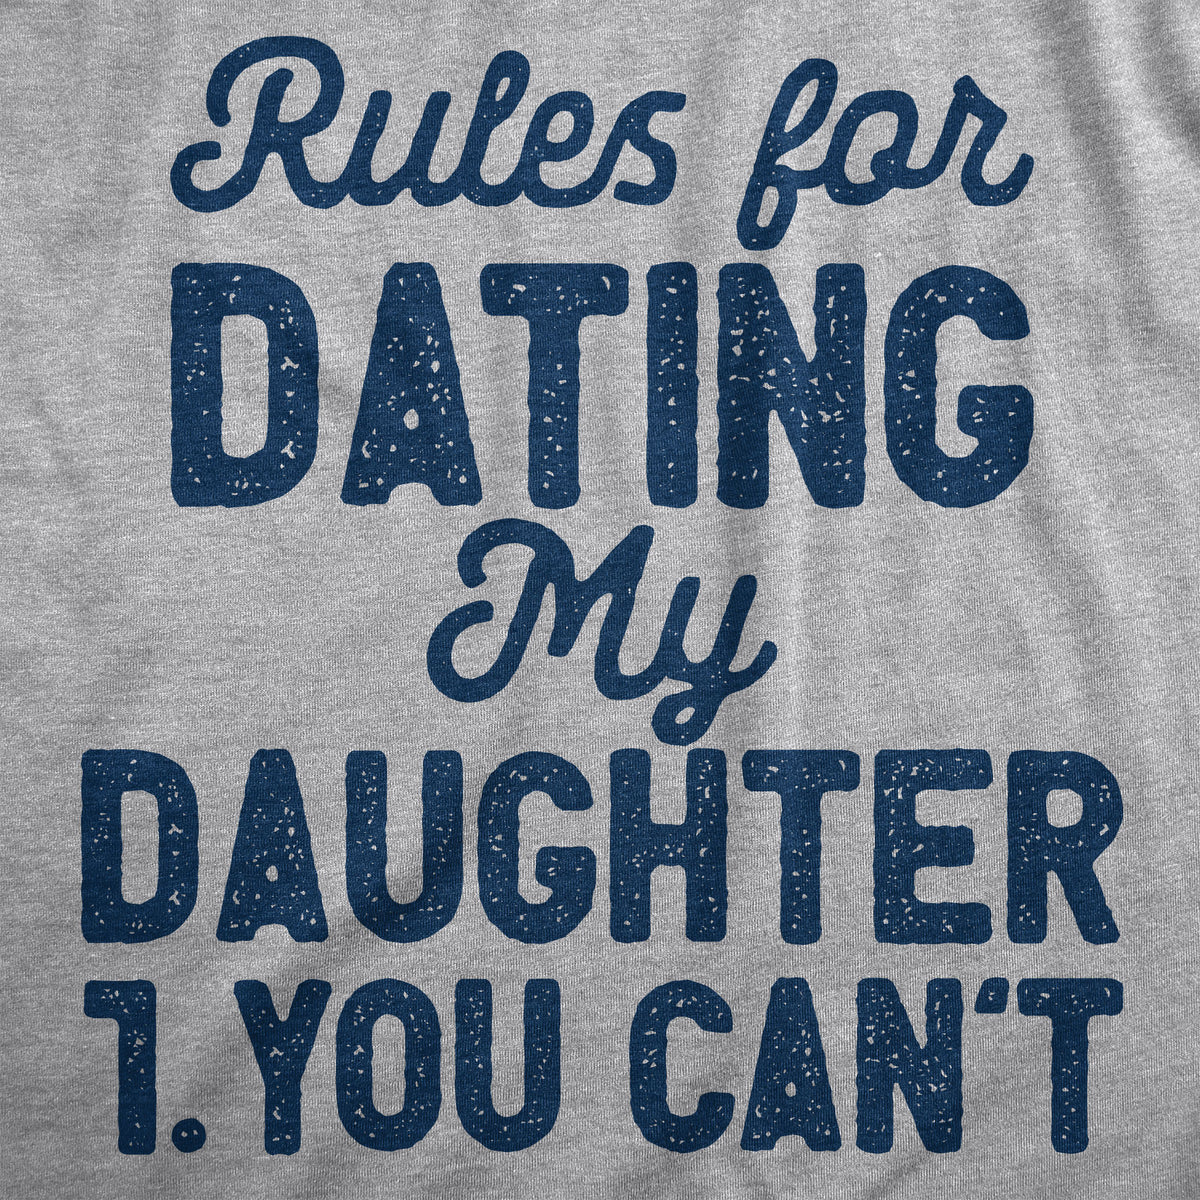 Rules For Dating My Daughter Men&#39;s T Shirt